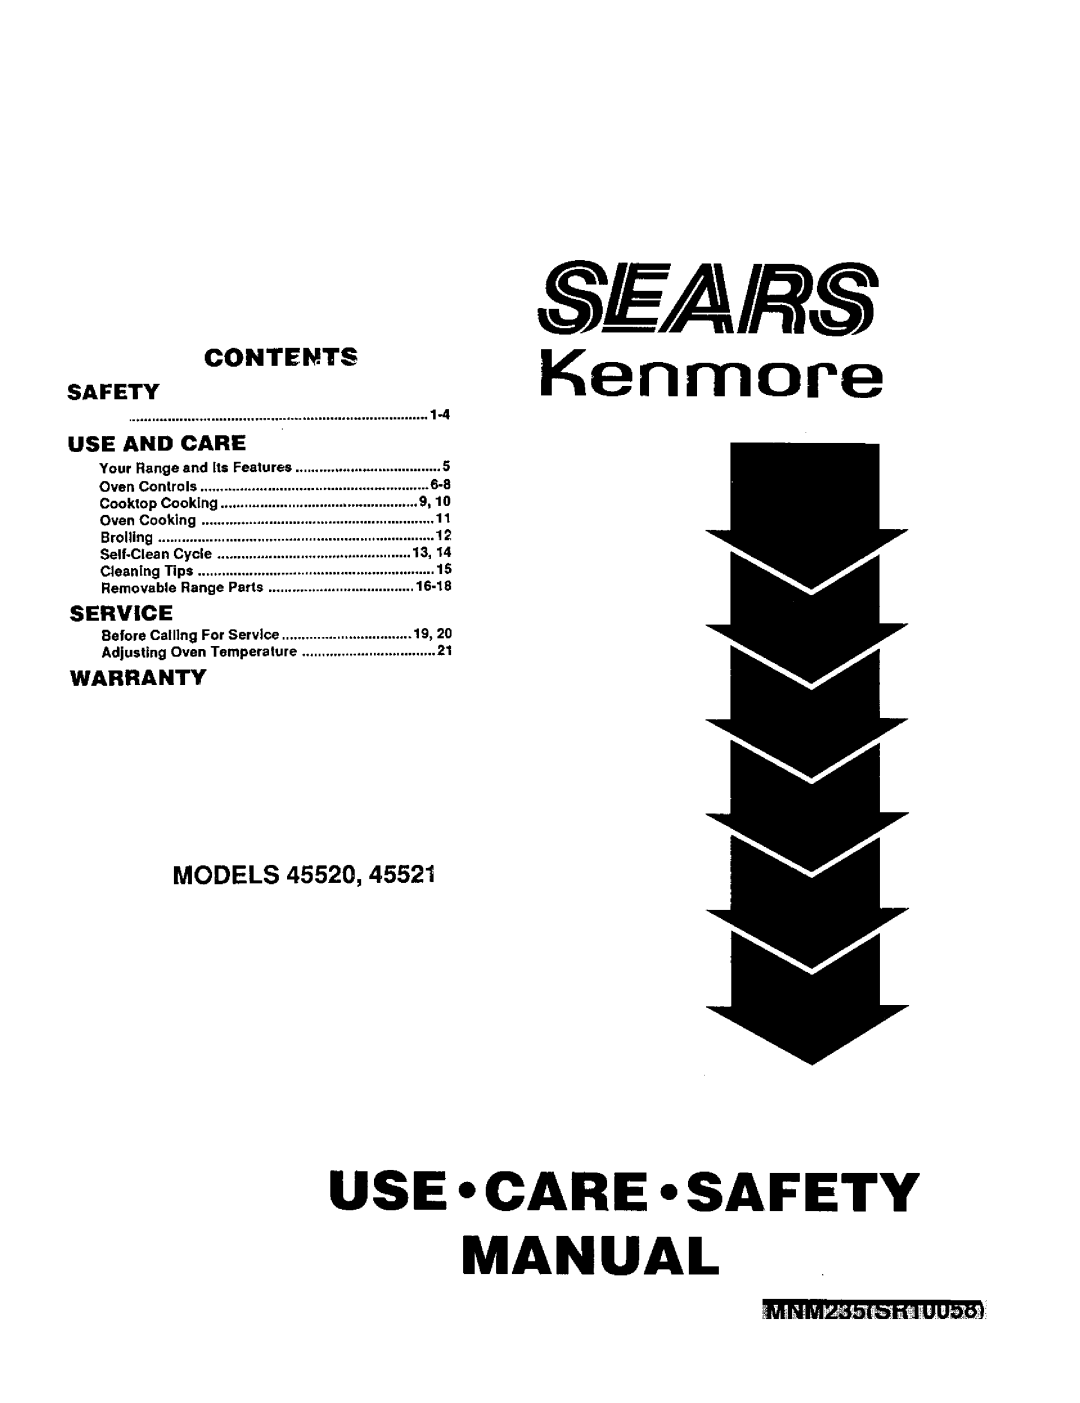 Sears 45520, 45521 warranty Use • Care • Safety Manual, Models, Contents, Kenmore 